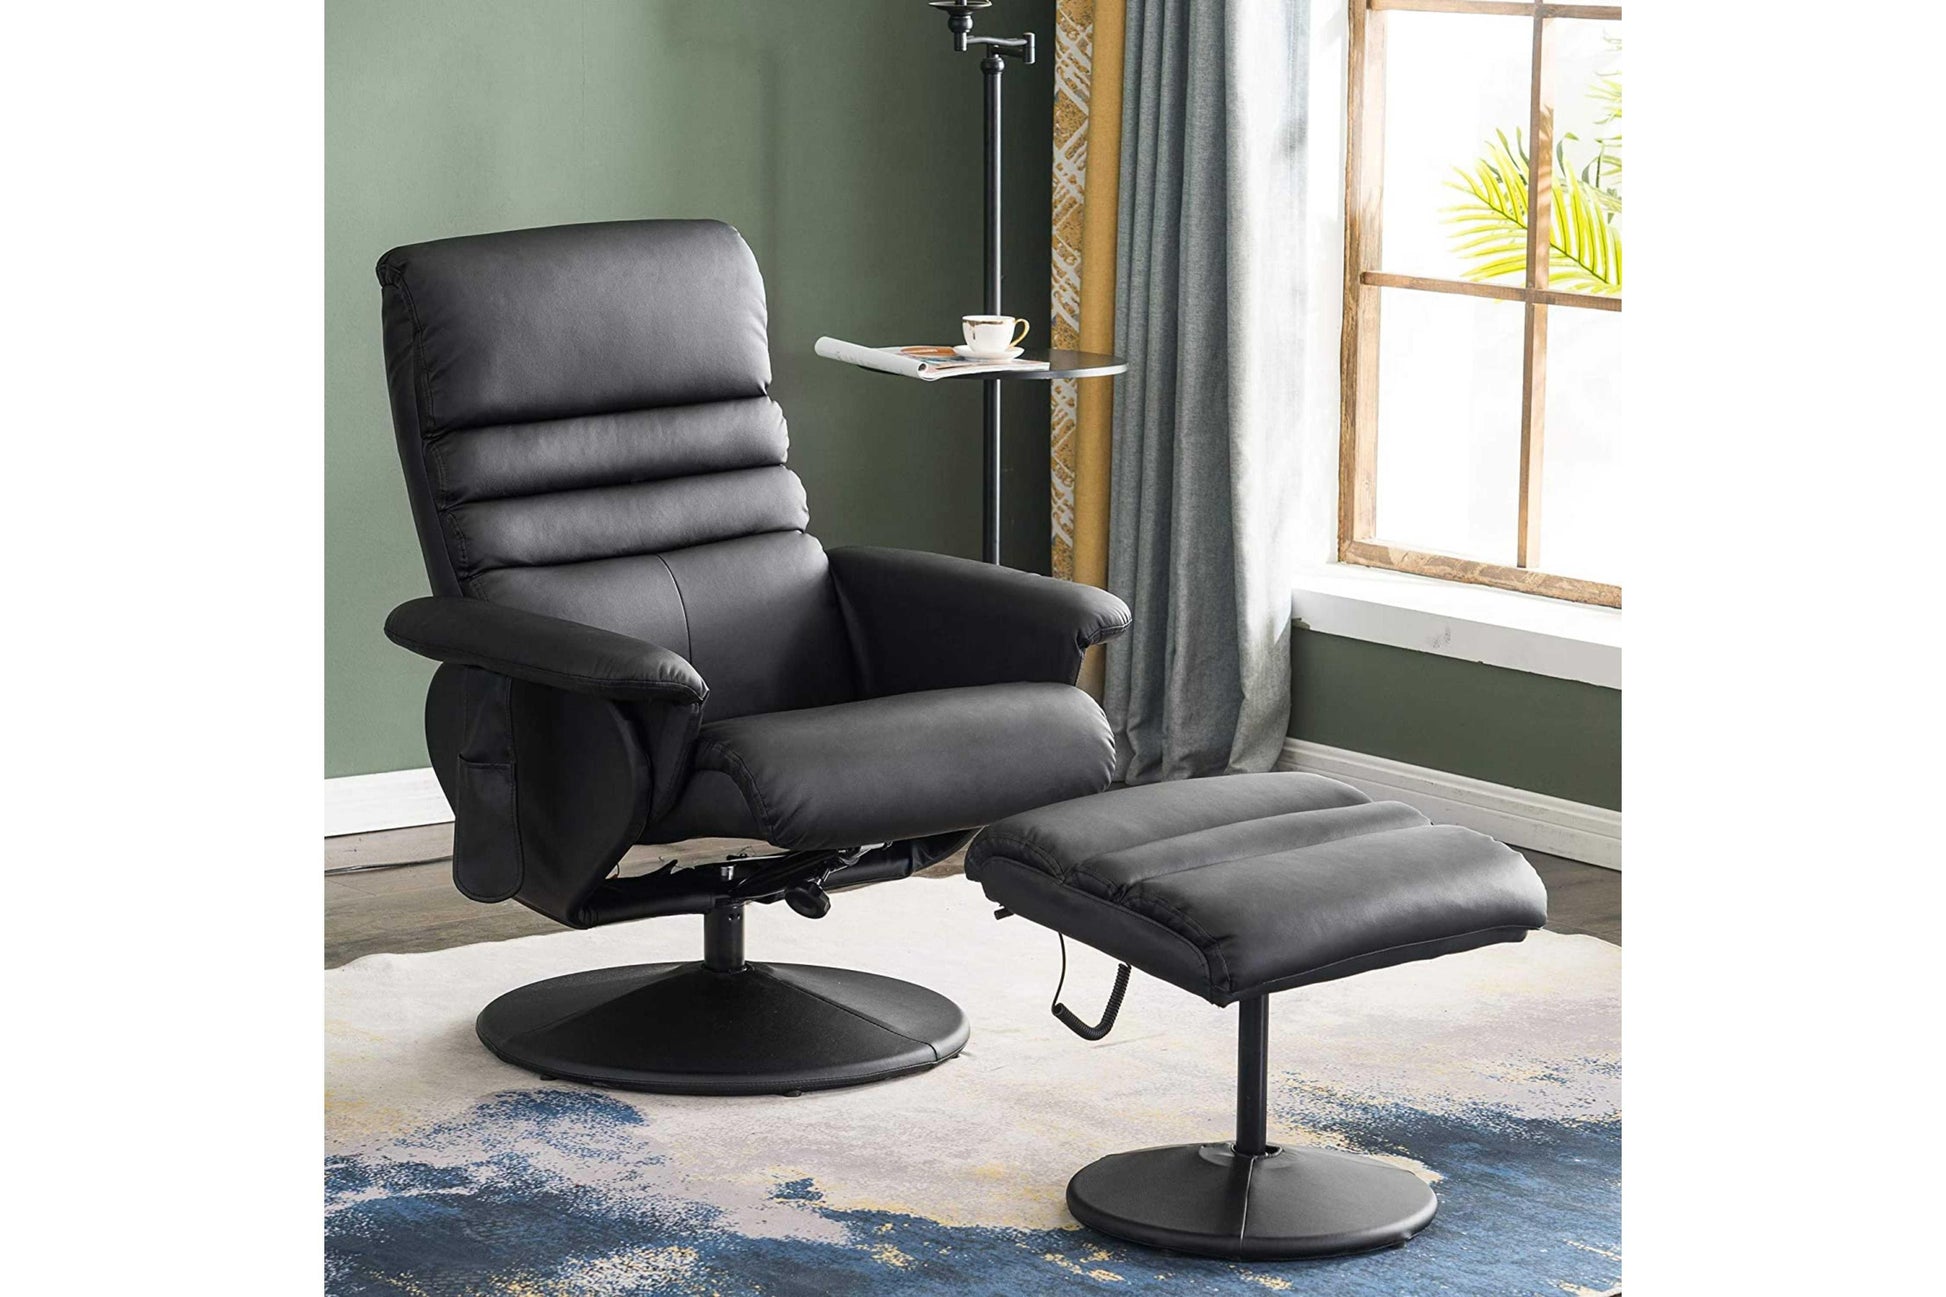 Mcombo Recliner with Ottoman, Reclining Chair with Massage, 360 Swivel Living Room Chair Faux Leather - Venini Furniture 